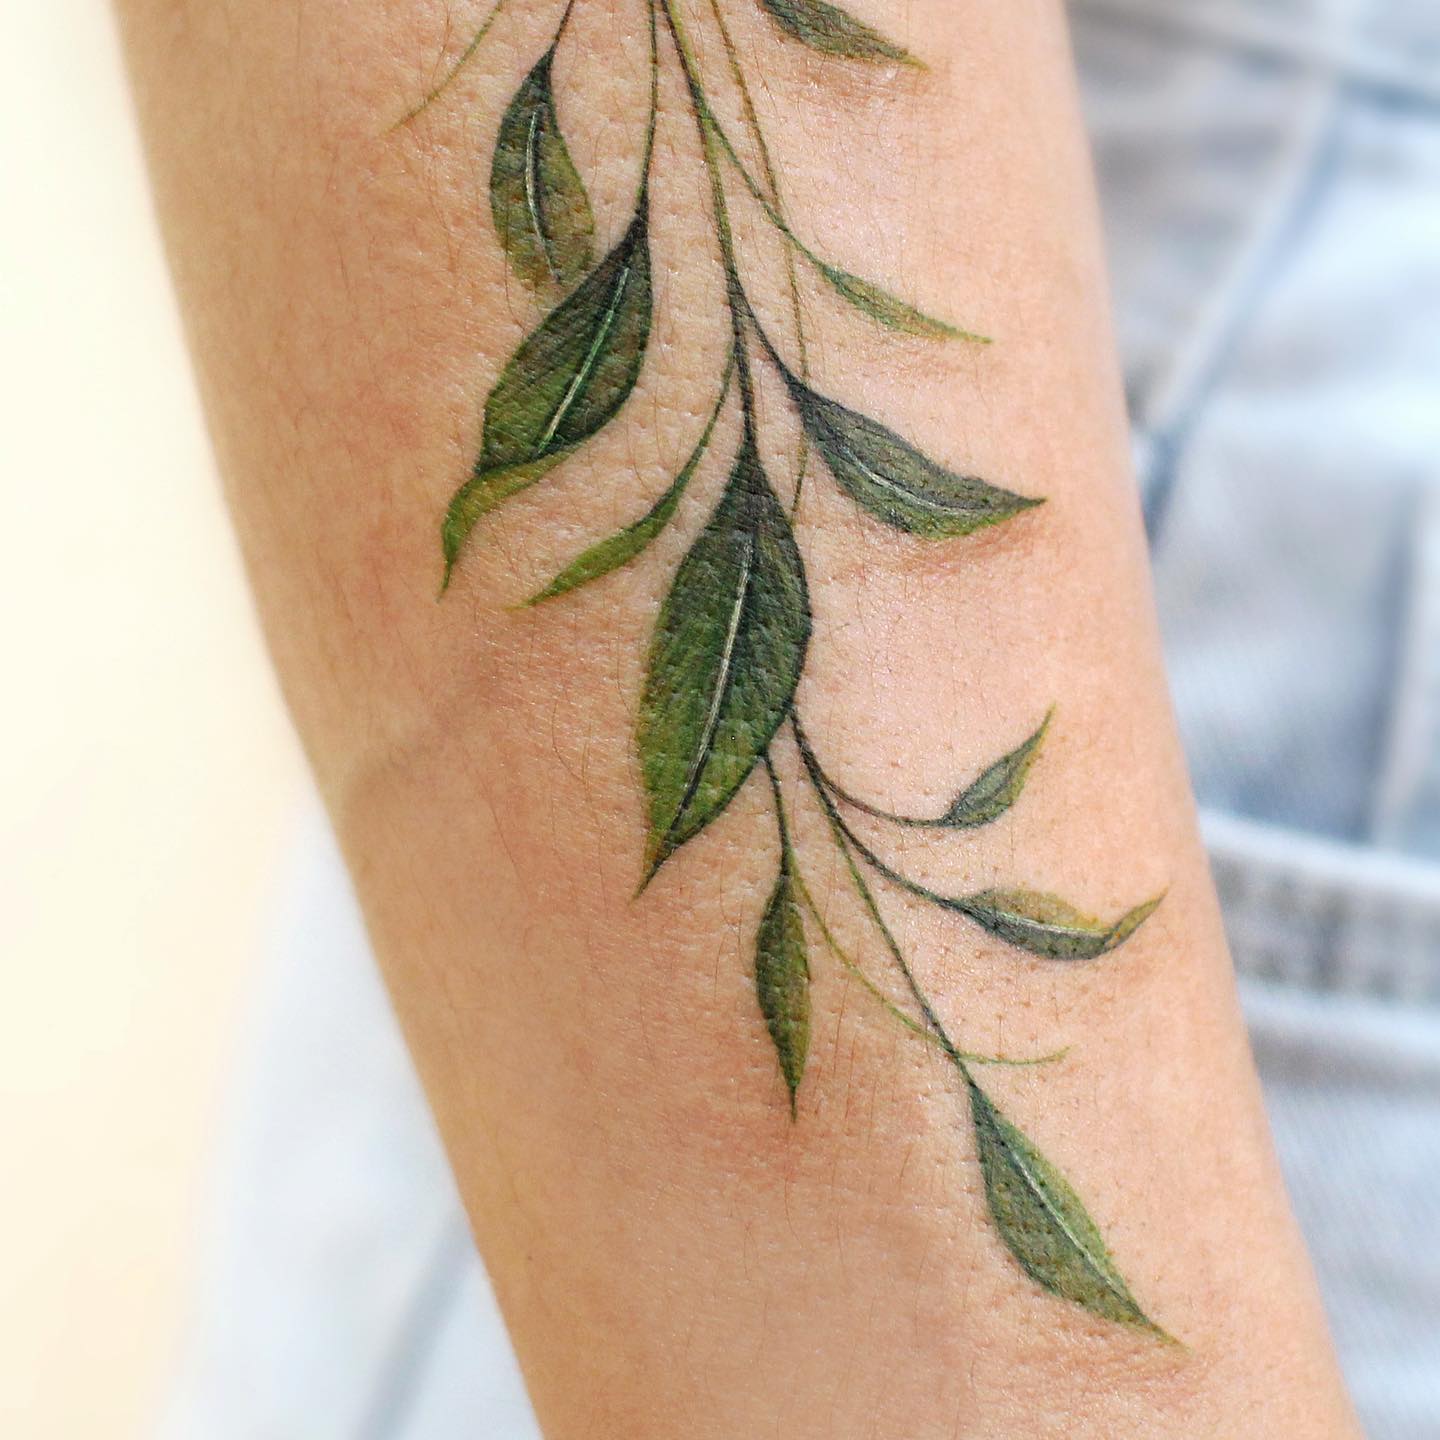 The leaves above look like real, don't they? With its color and special technique used in it, this tattoo can be one of the best realistic tattoos, for sure.